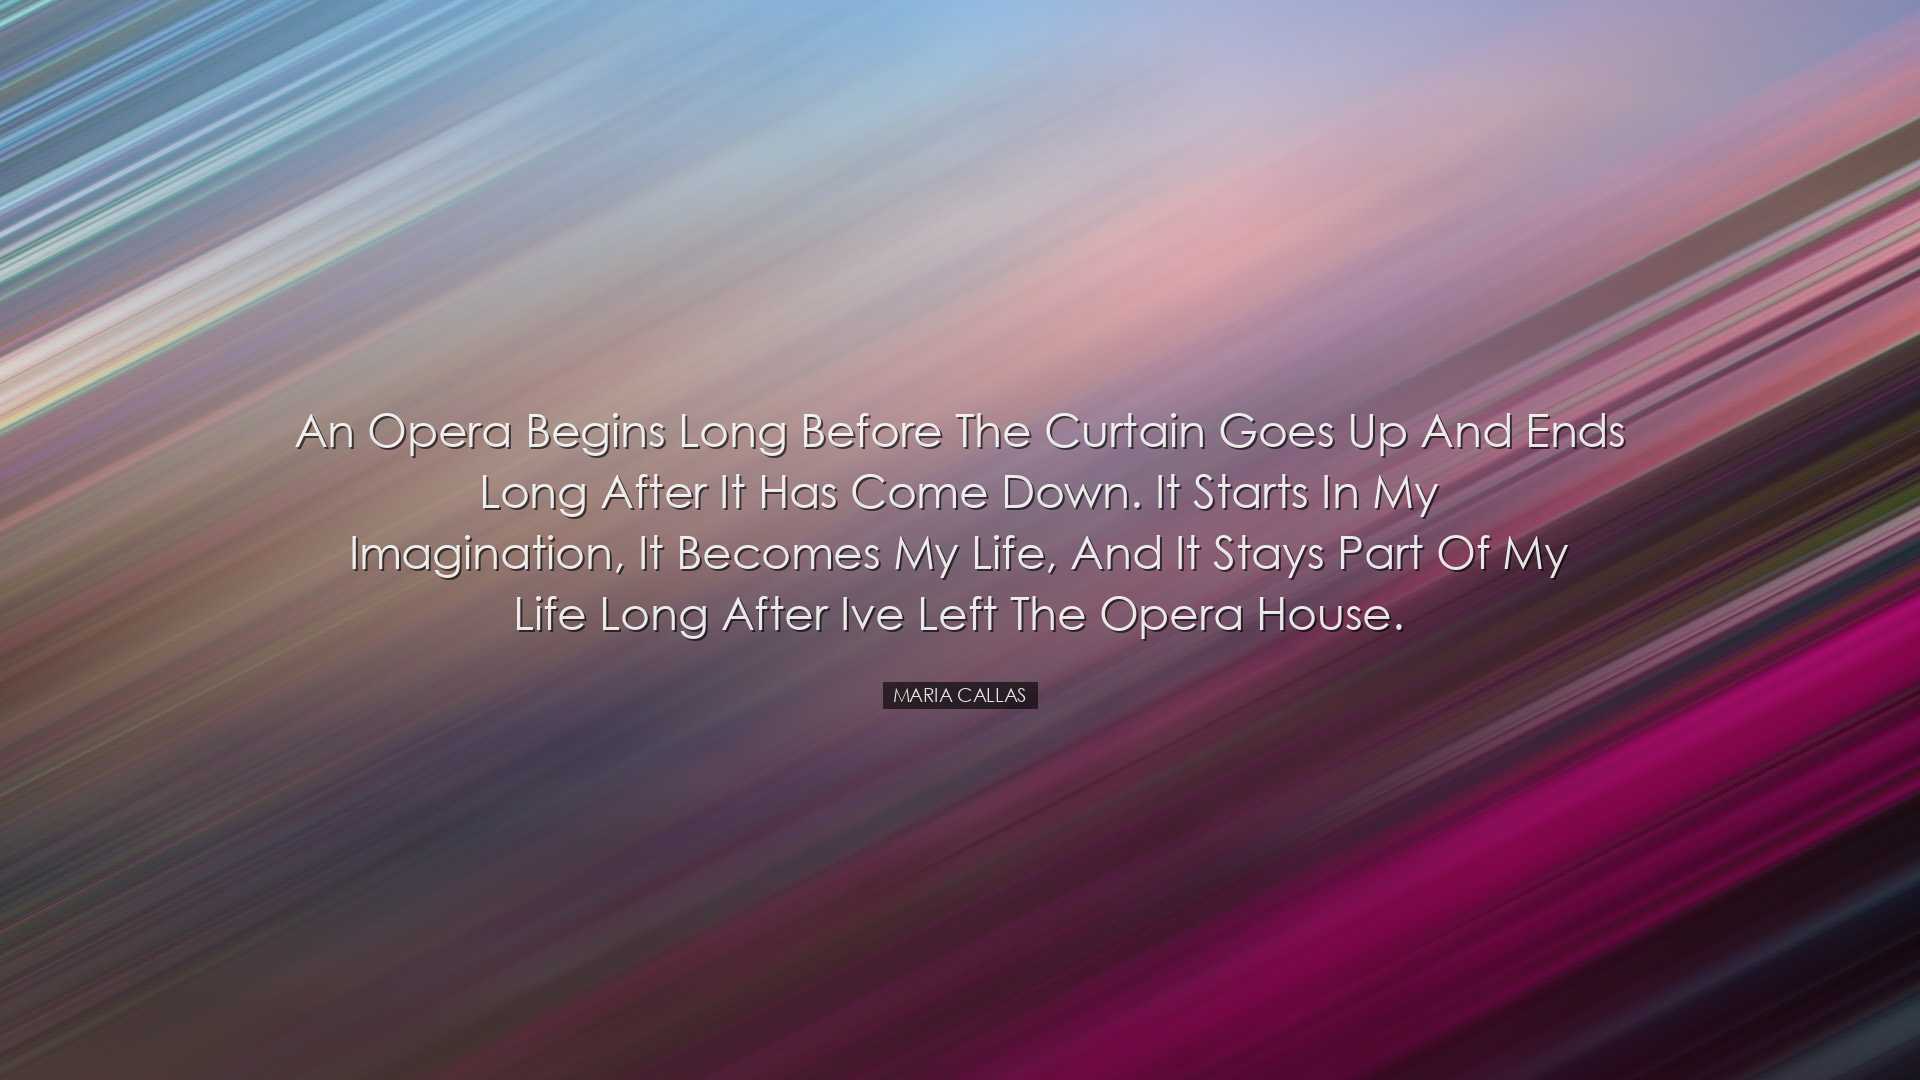 An opera begins long before the curtain goes up and ends long afte